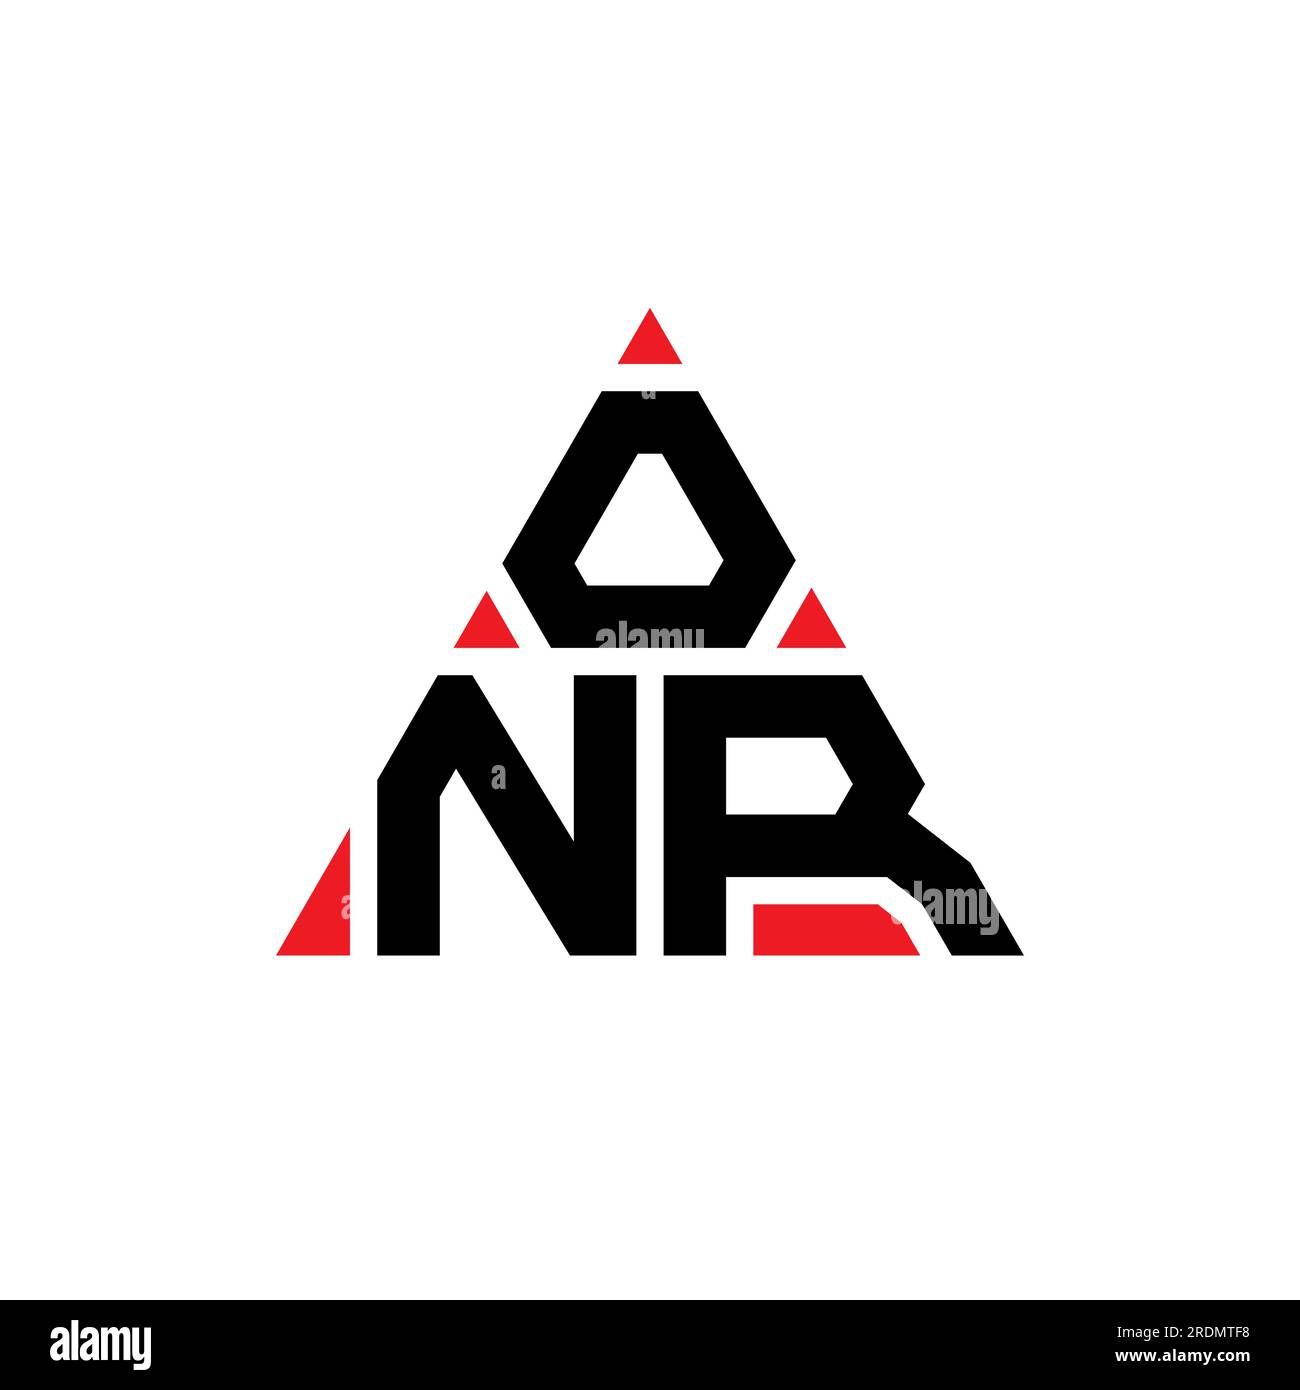 Onr logo Cut Out Stock Images & Pictures - Alamy